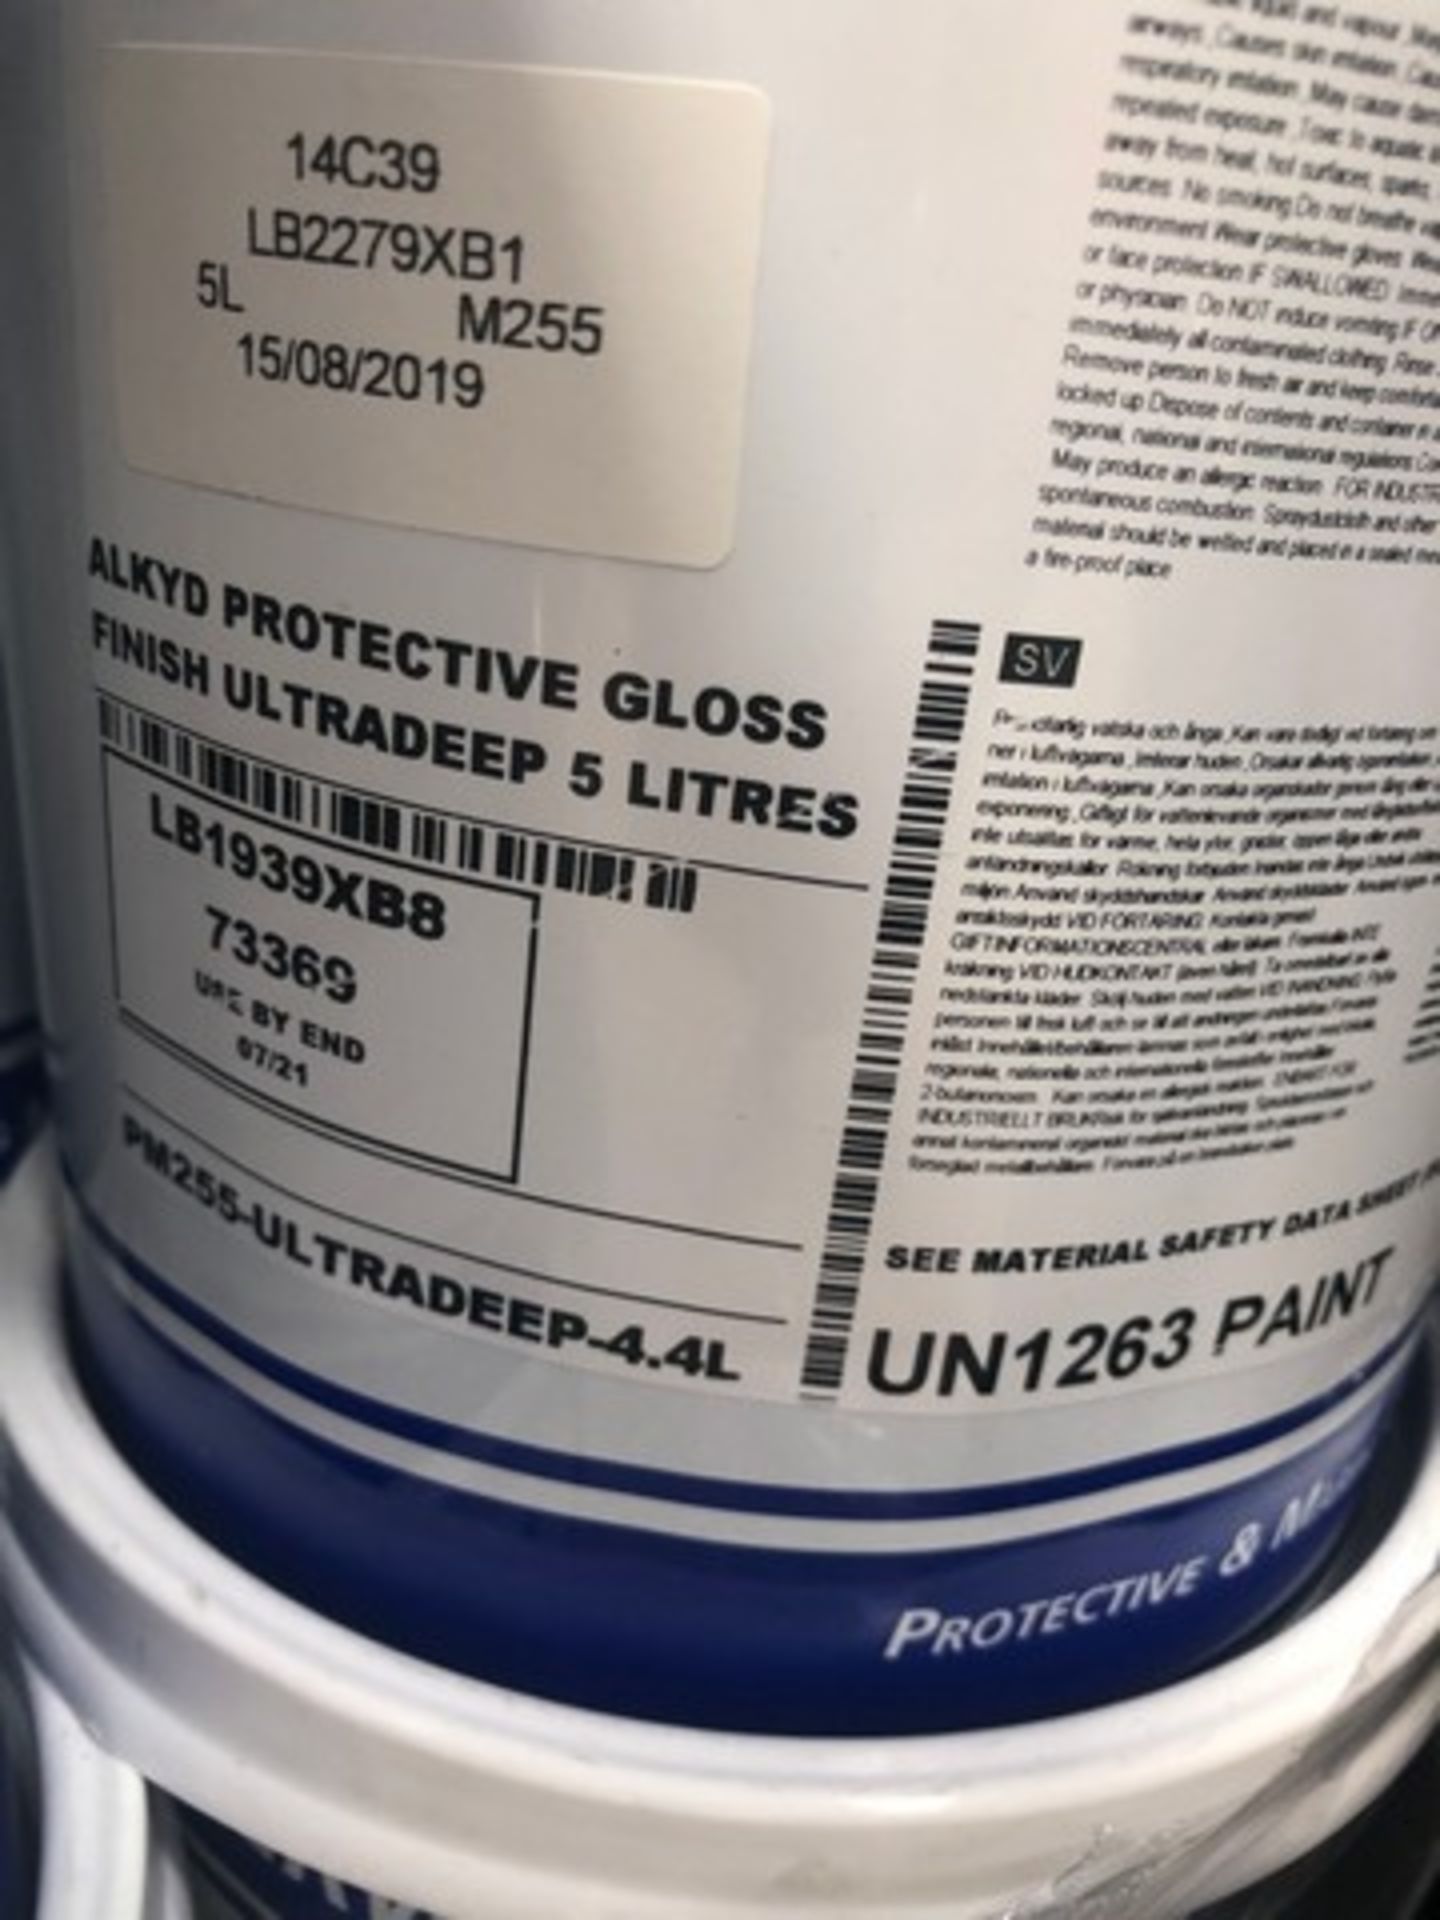 Pallet of Sherwin Williams kem-kromik 255 Protective gloss finish approx 20 tins - Image 2 of 2